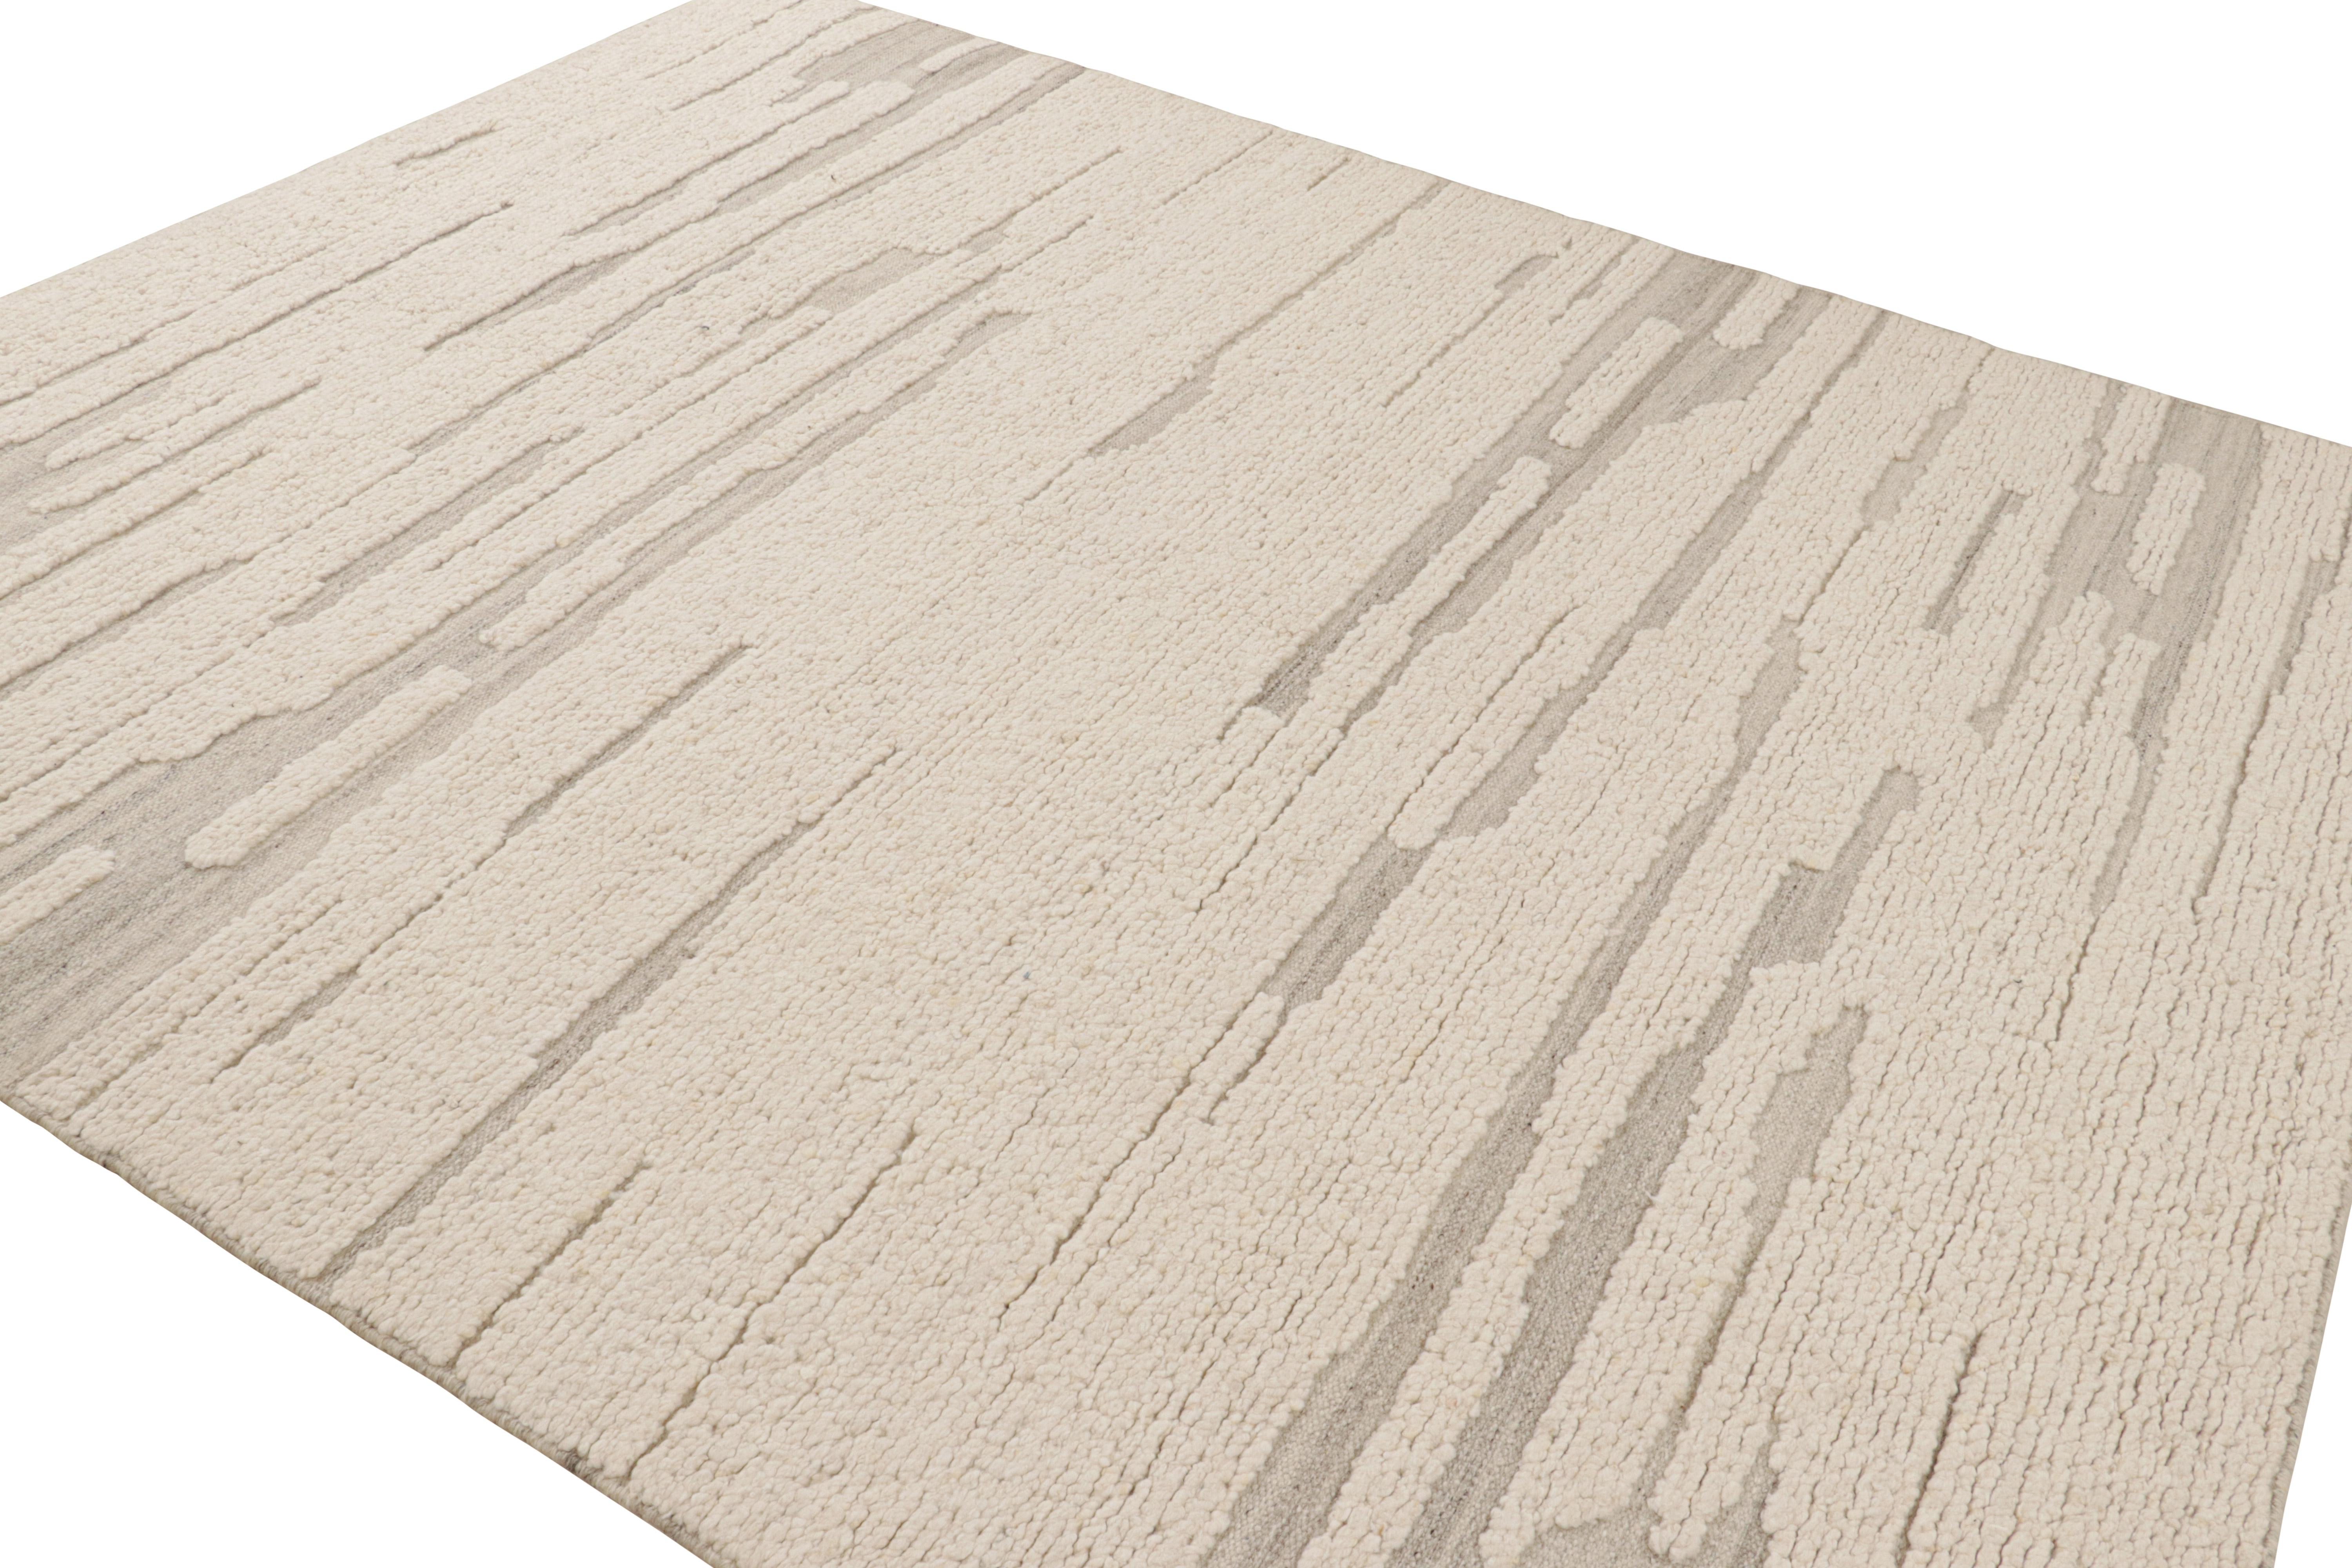 Indian Rug & Kilim’s Textural Kilim in White Abstract High-Low Patterns For Sale